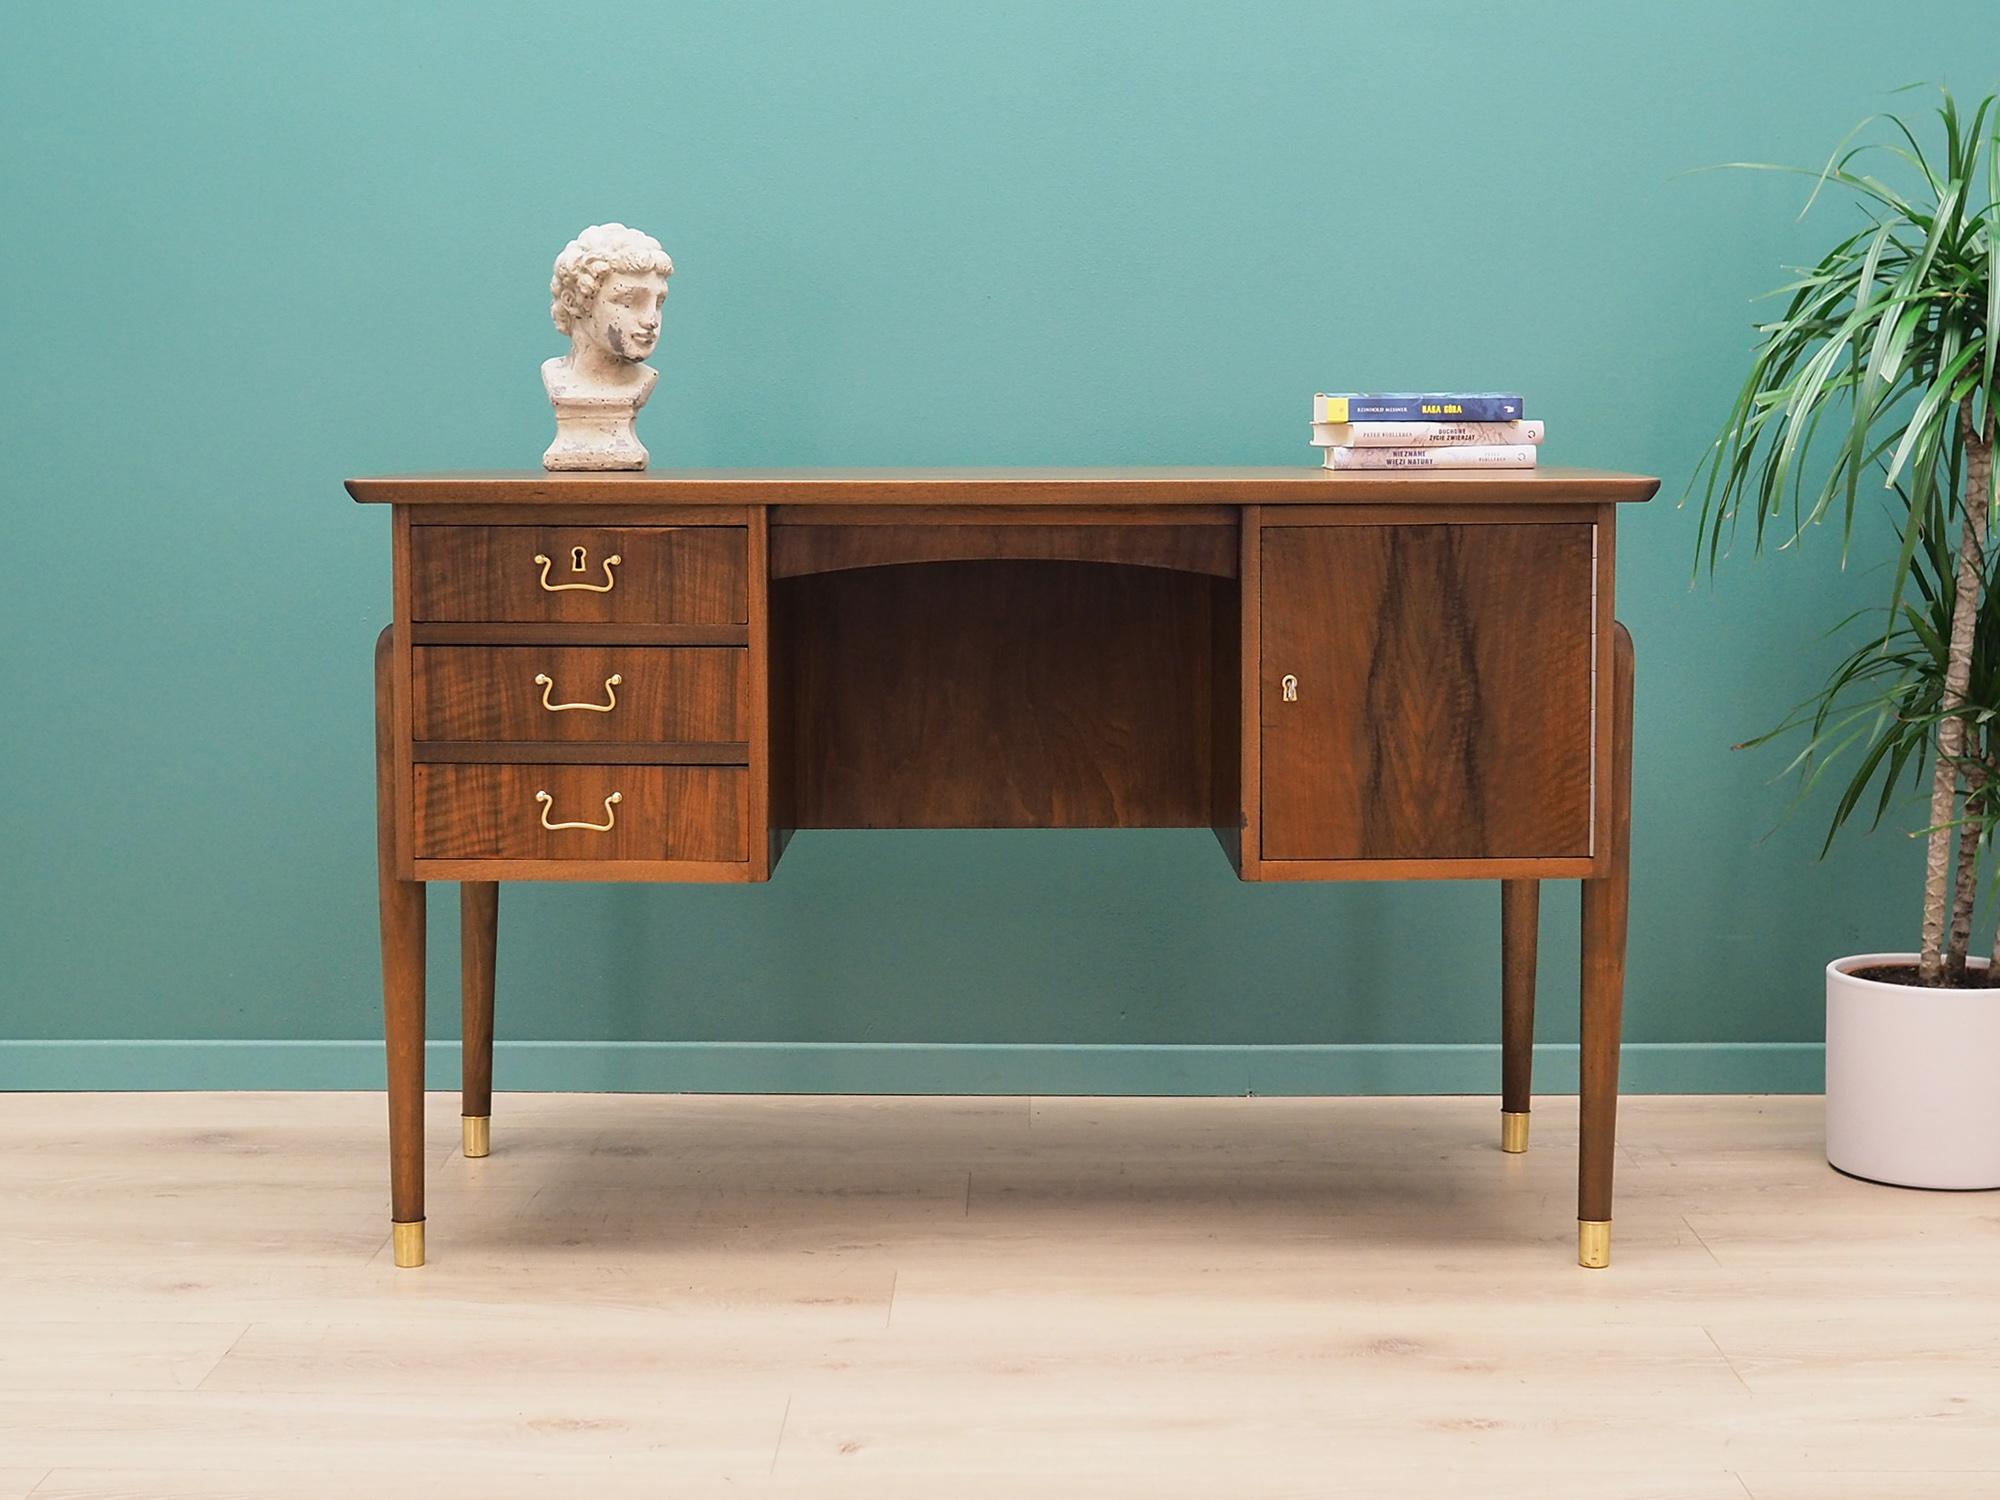 Desk made in the 1970s, Danish production.

The structure and top are covered with walnut veneer. The legs are made of solid walnut wood, perfectly integrated into the structure of the desk. The surface after refreshing. The front of the desk has